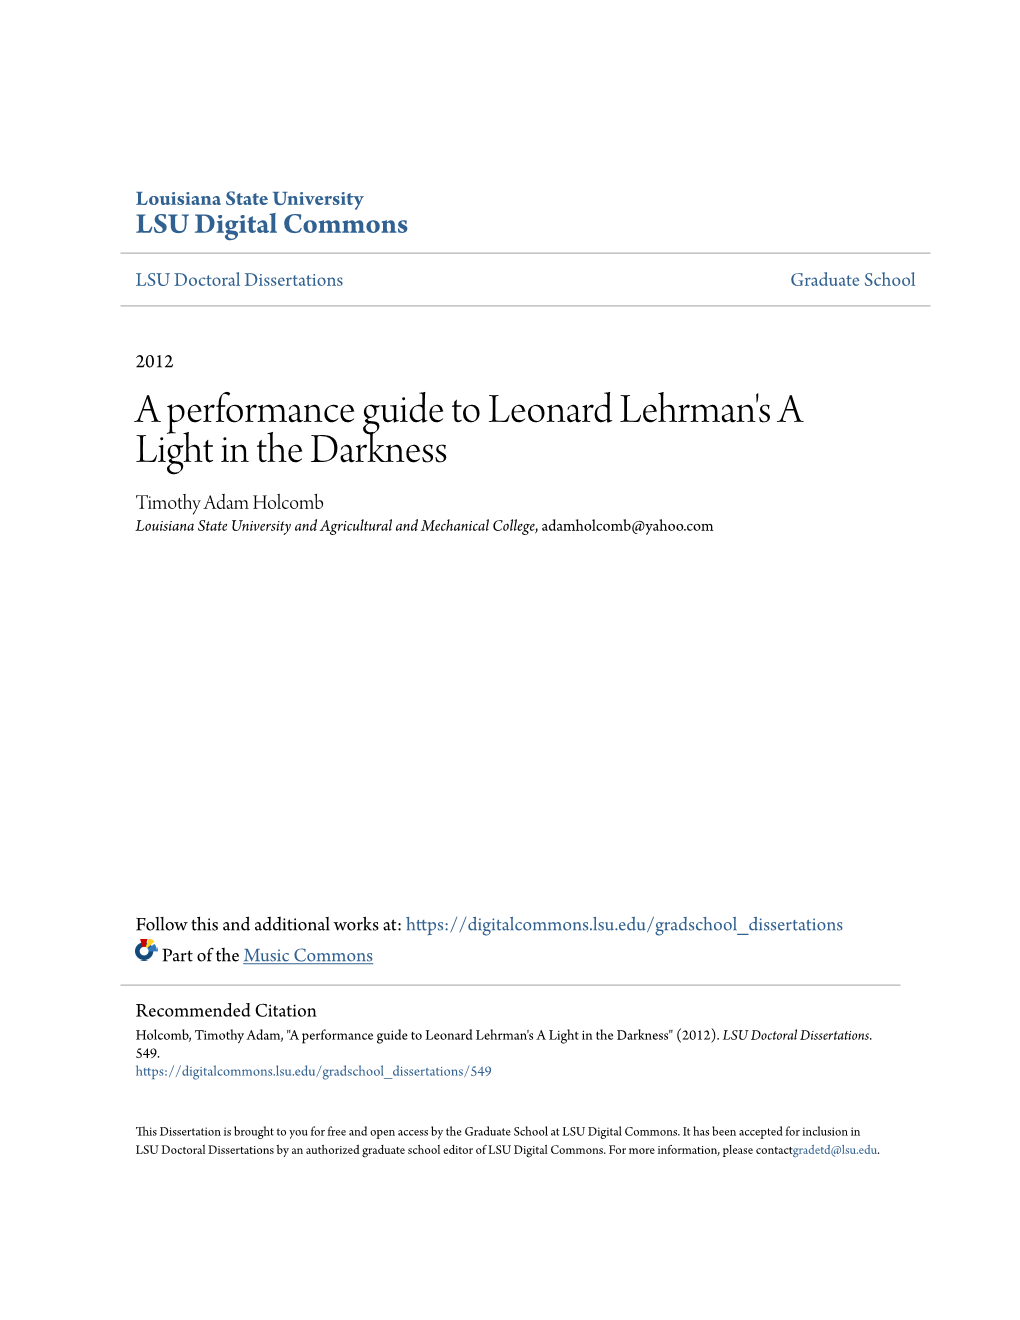 A Performance Guide to Leonard Lehrman's a Light in the Darkness